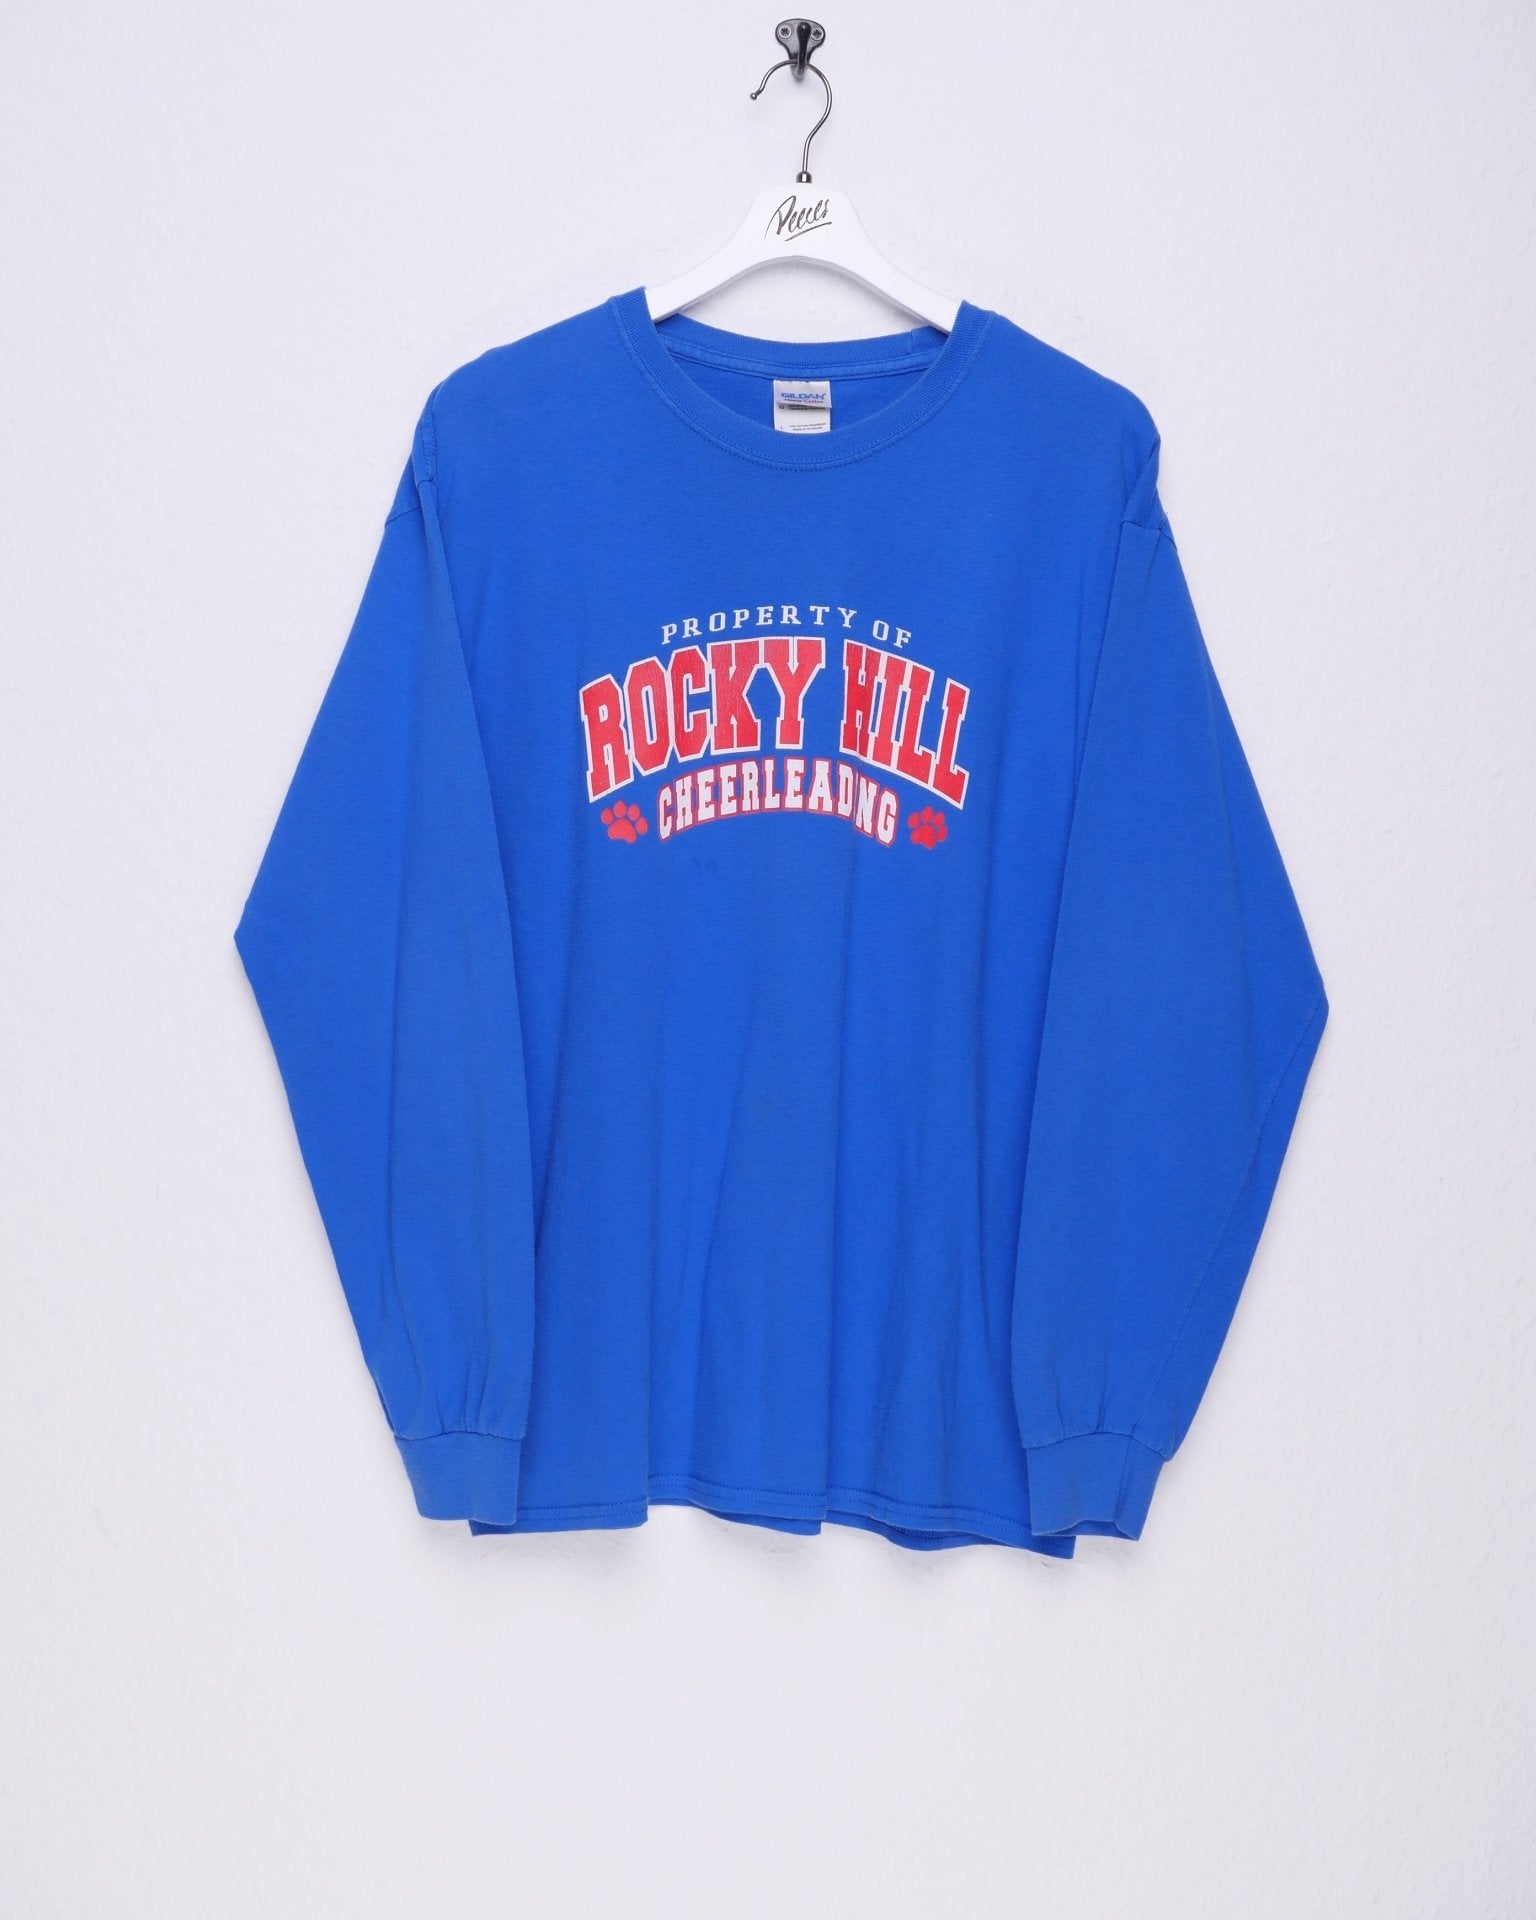 Rocky Hill Cheerleading printed Spellout L/S Shirt - Peeces